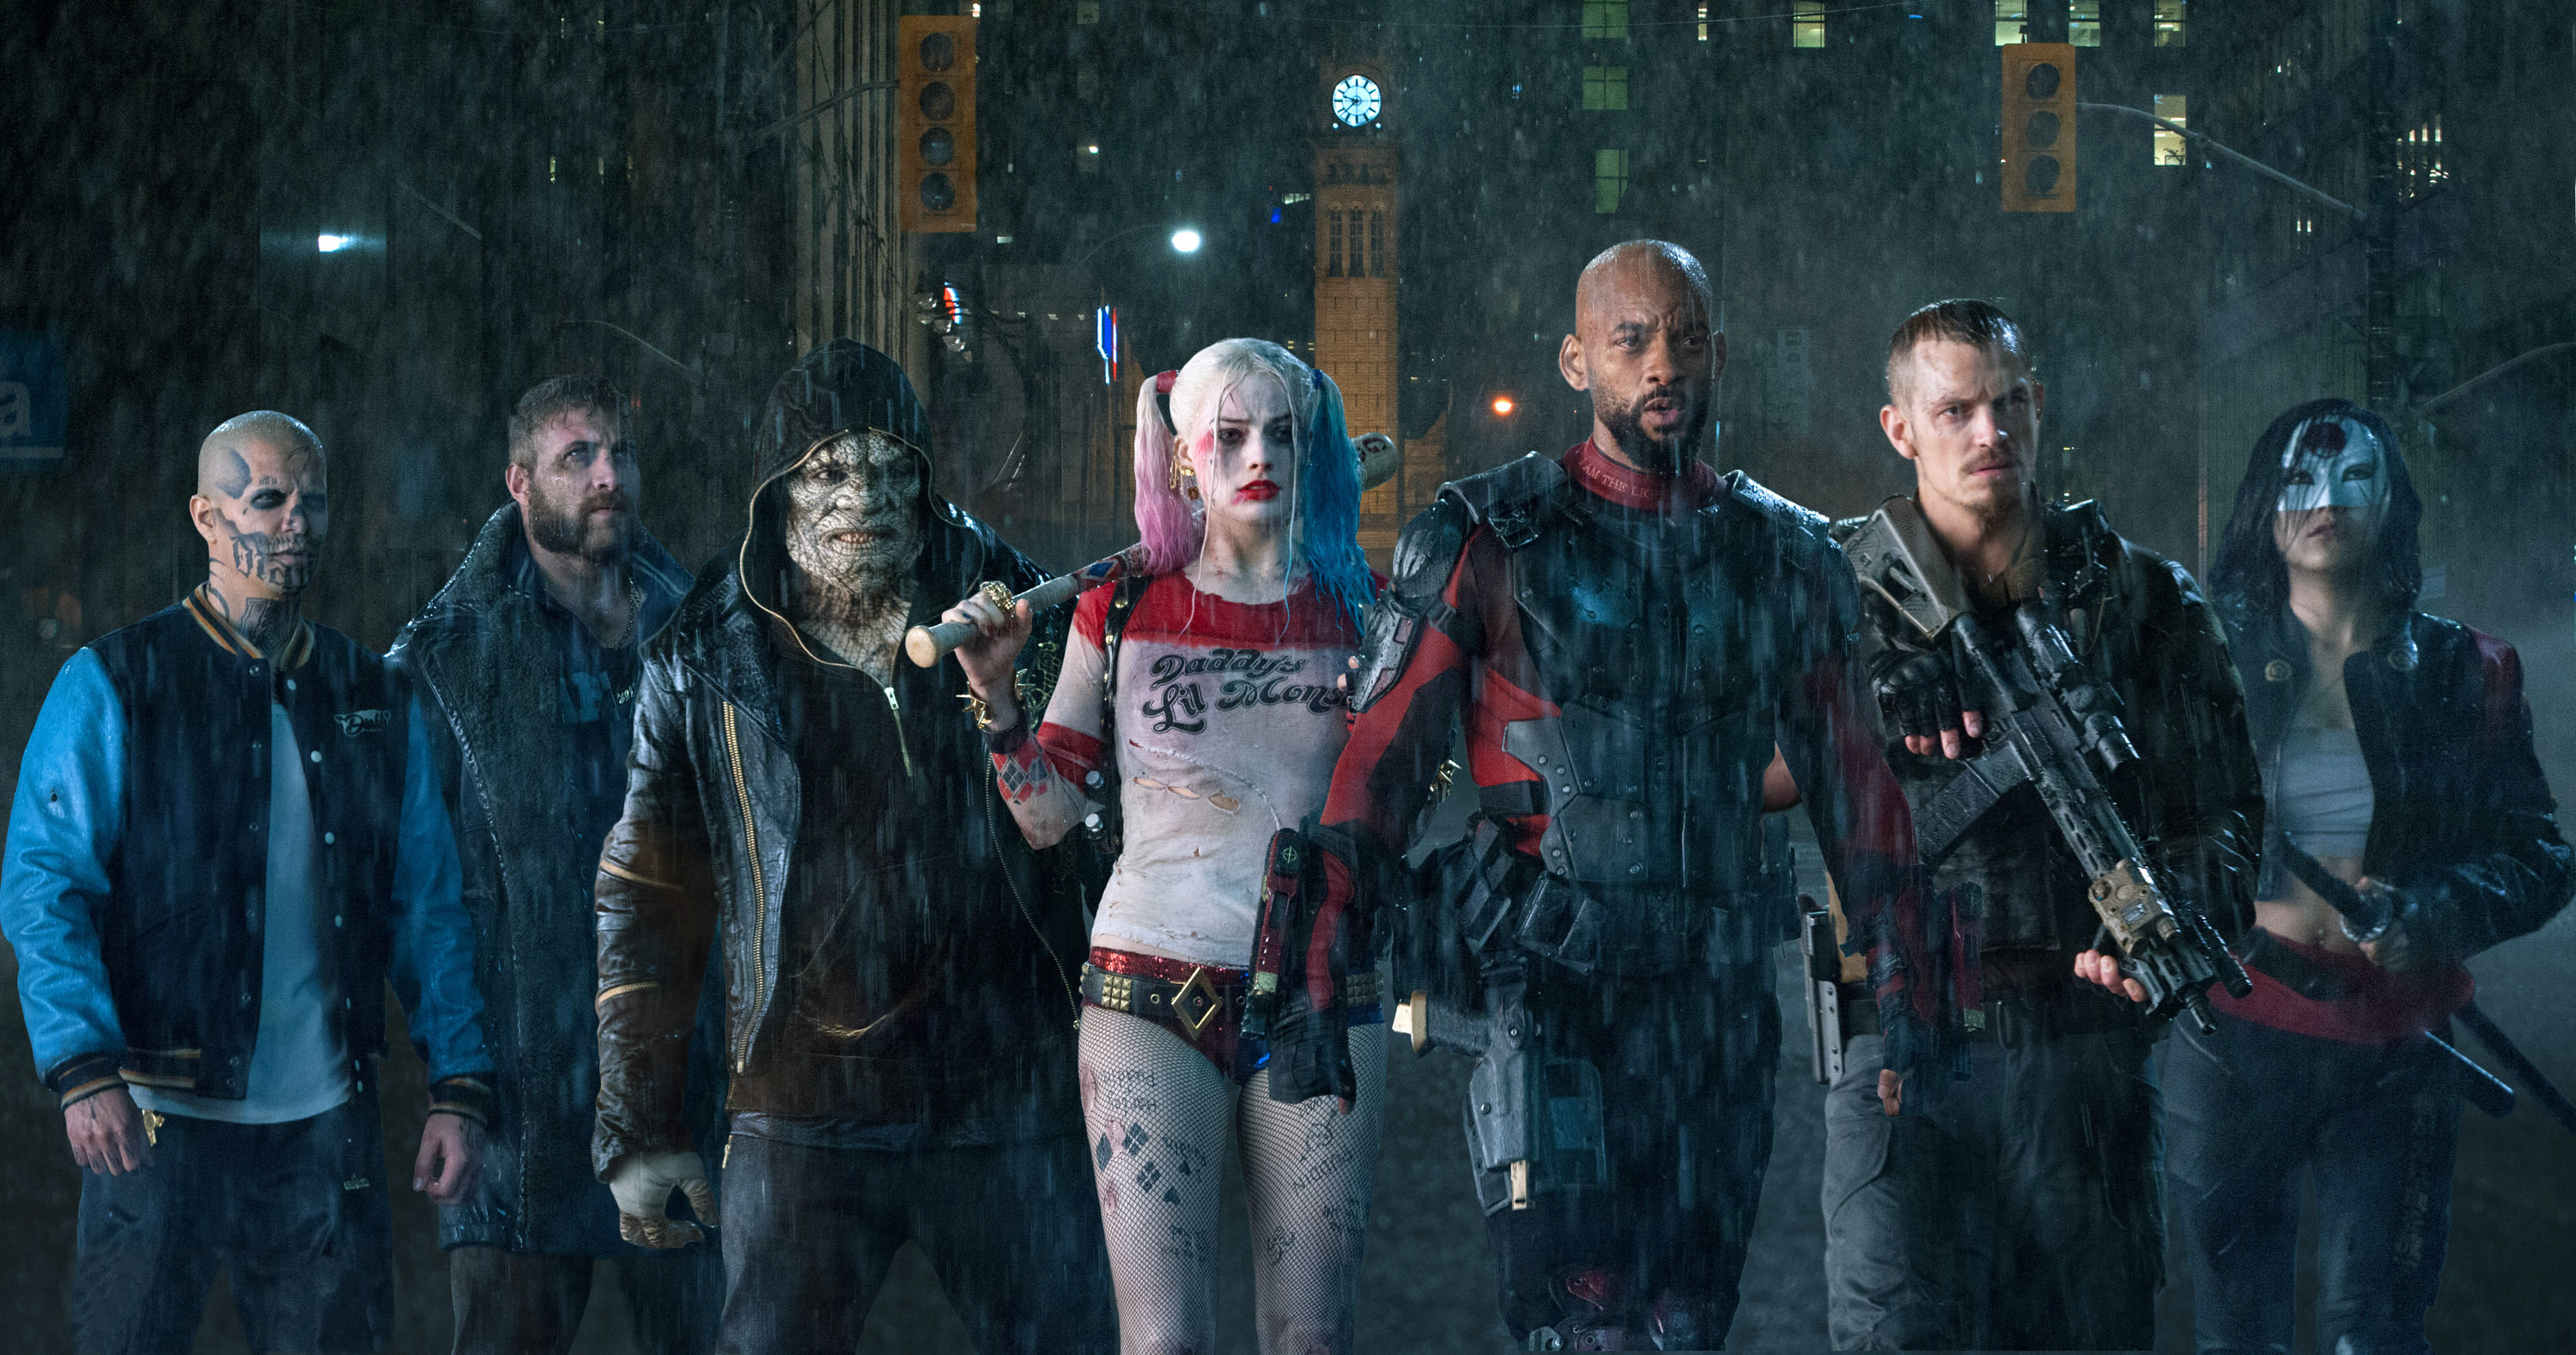 This image released by Warner Bros. Pictures shows, from left, Jay Hernandez as Diablo, Jai Courtney as Boomerang, Adewale Akinnuoye-Agbaje as Killer Croc, Margot Robbie as Harley Quinn, Will Smith as Deadshot, Joel Kinnaman as Rick Flag and Karen Fukuhara as Katana in a scene from "Suicide Squad." (Clay Enos/Warner Bros. Pictures via AP)